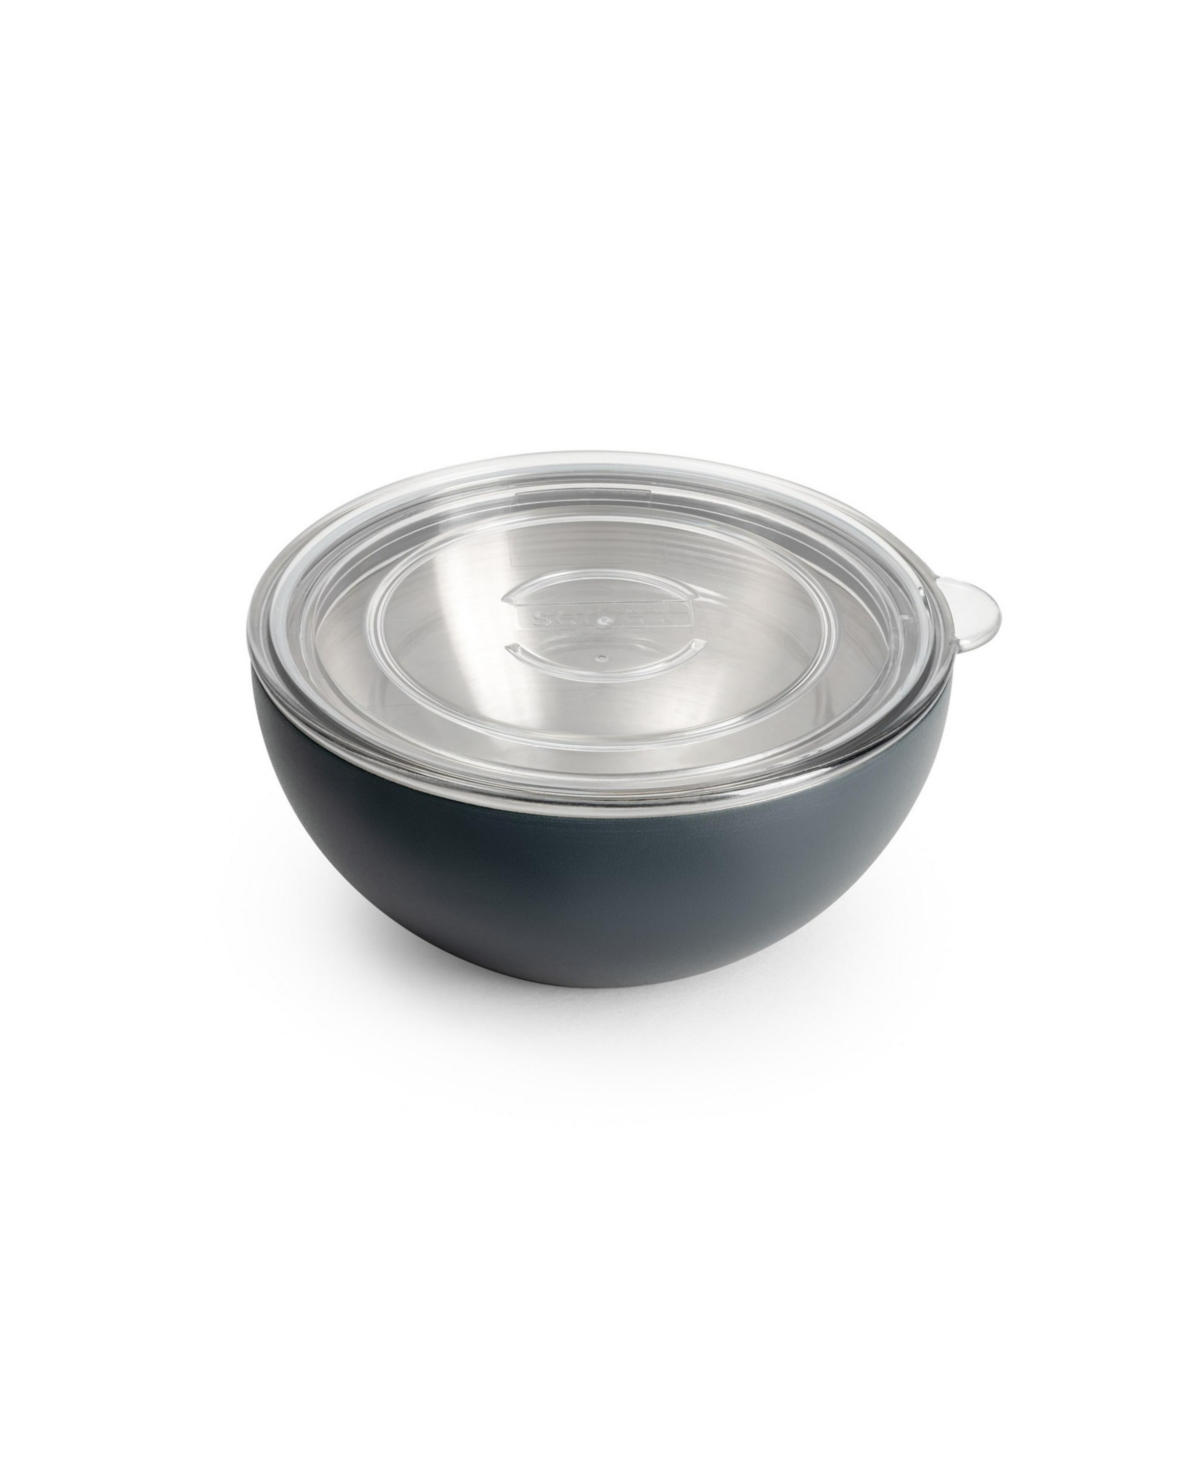 Served Vacuum-insulated Double-walled Copper-lined Stainless Steel Large Serving Bowl, 2.5 Quarts In Caviar